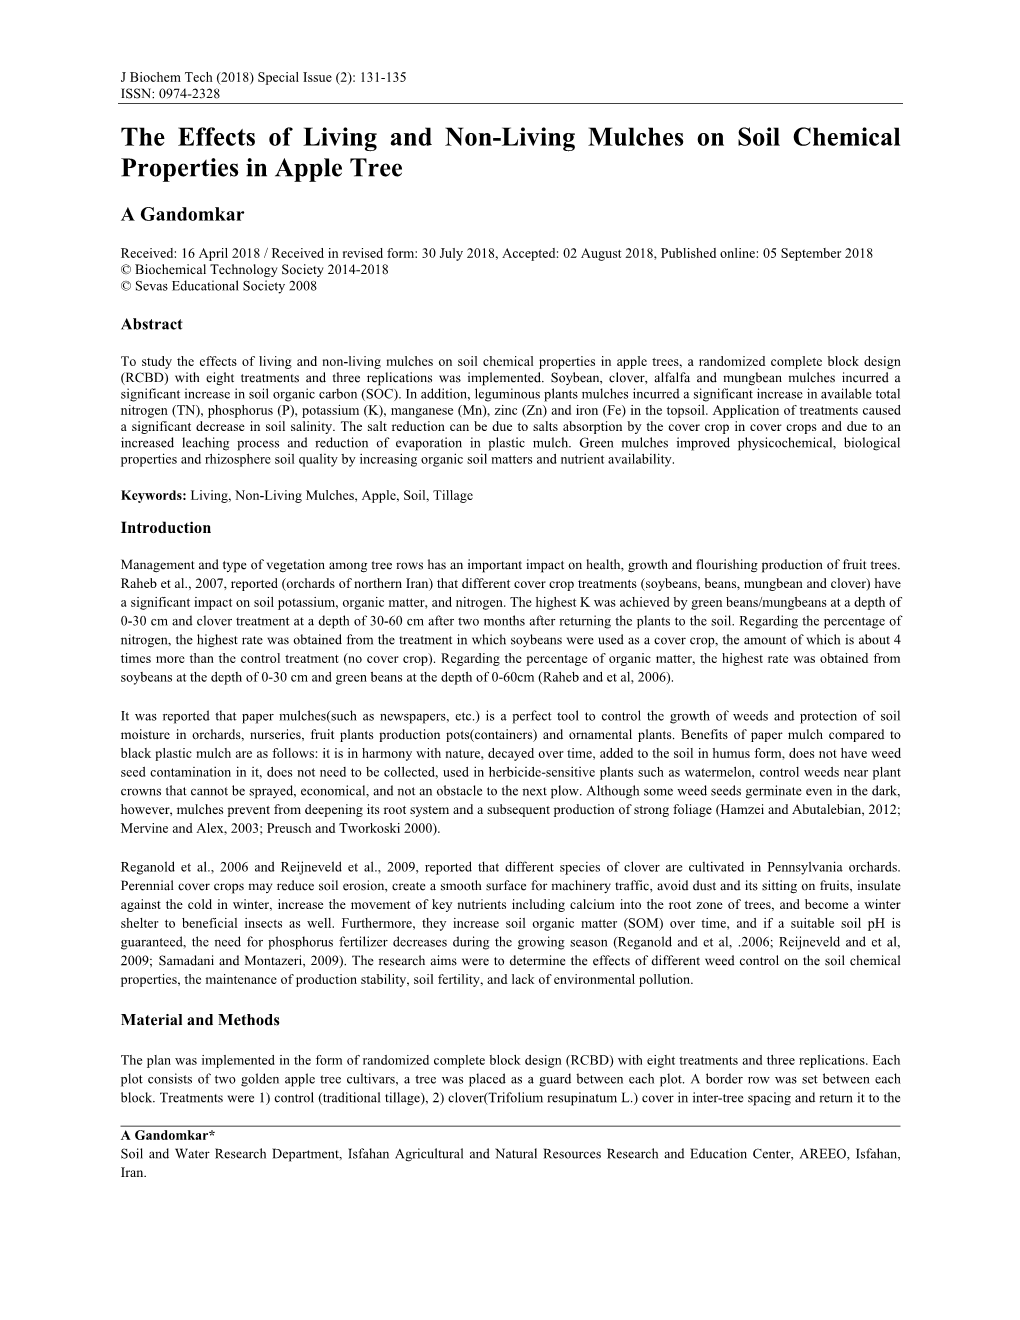 The Effects of Living and Non-Living Mulches on Soil Chemical Properties in Apple Tree